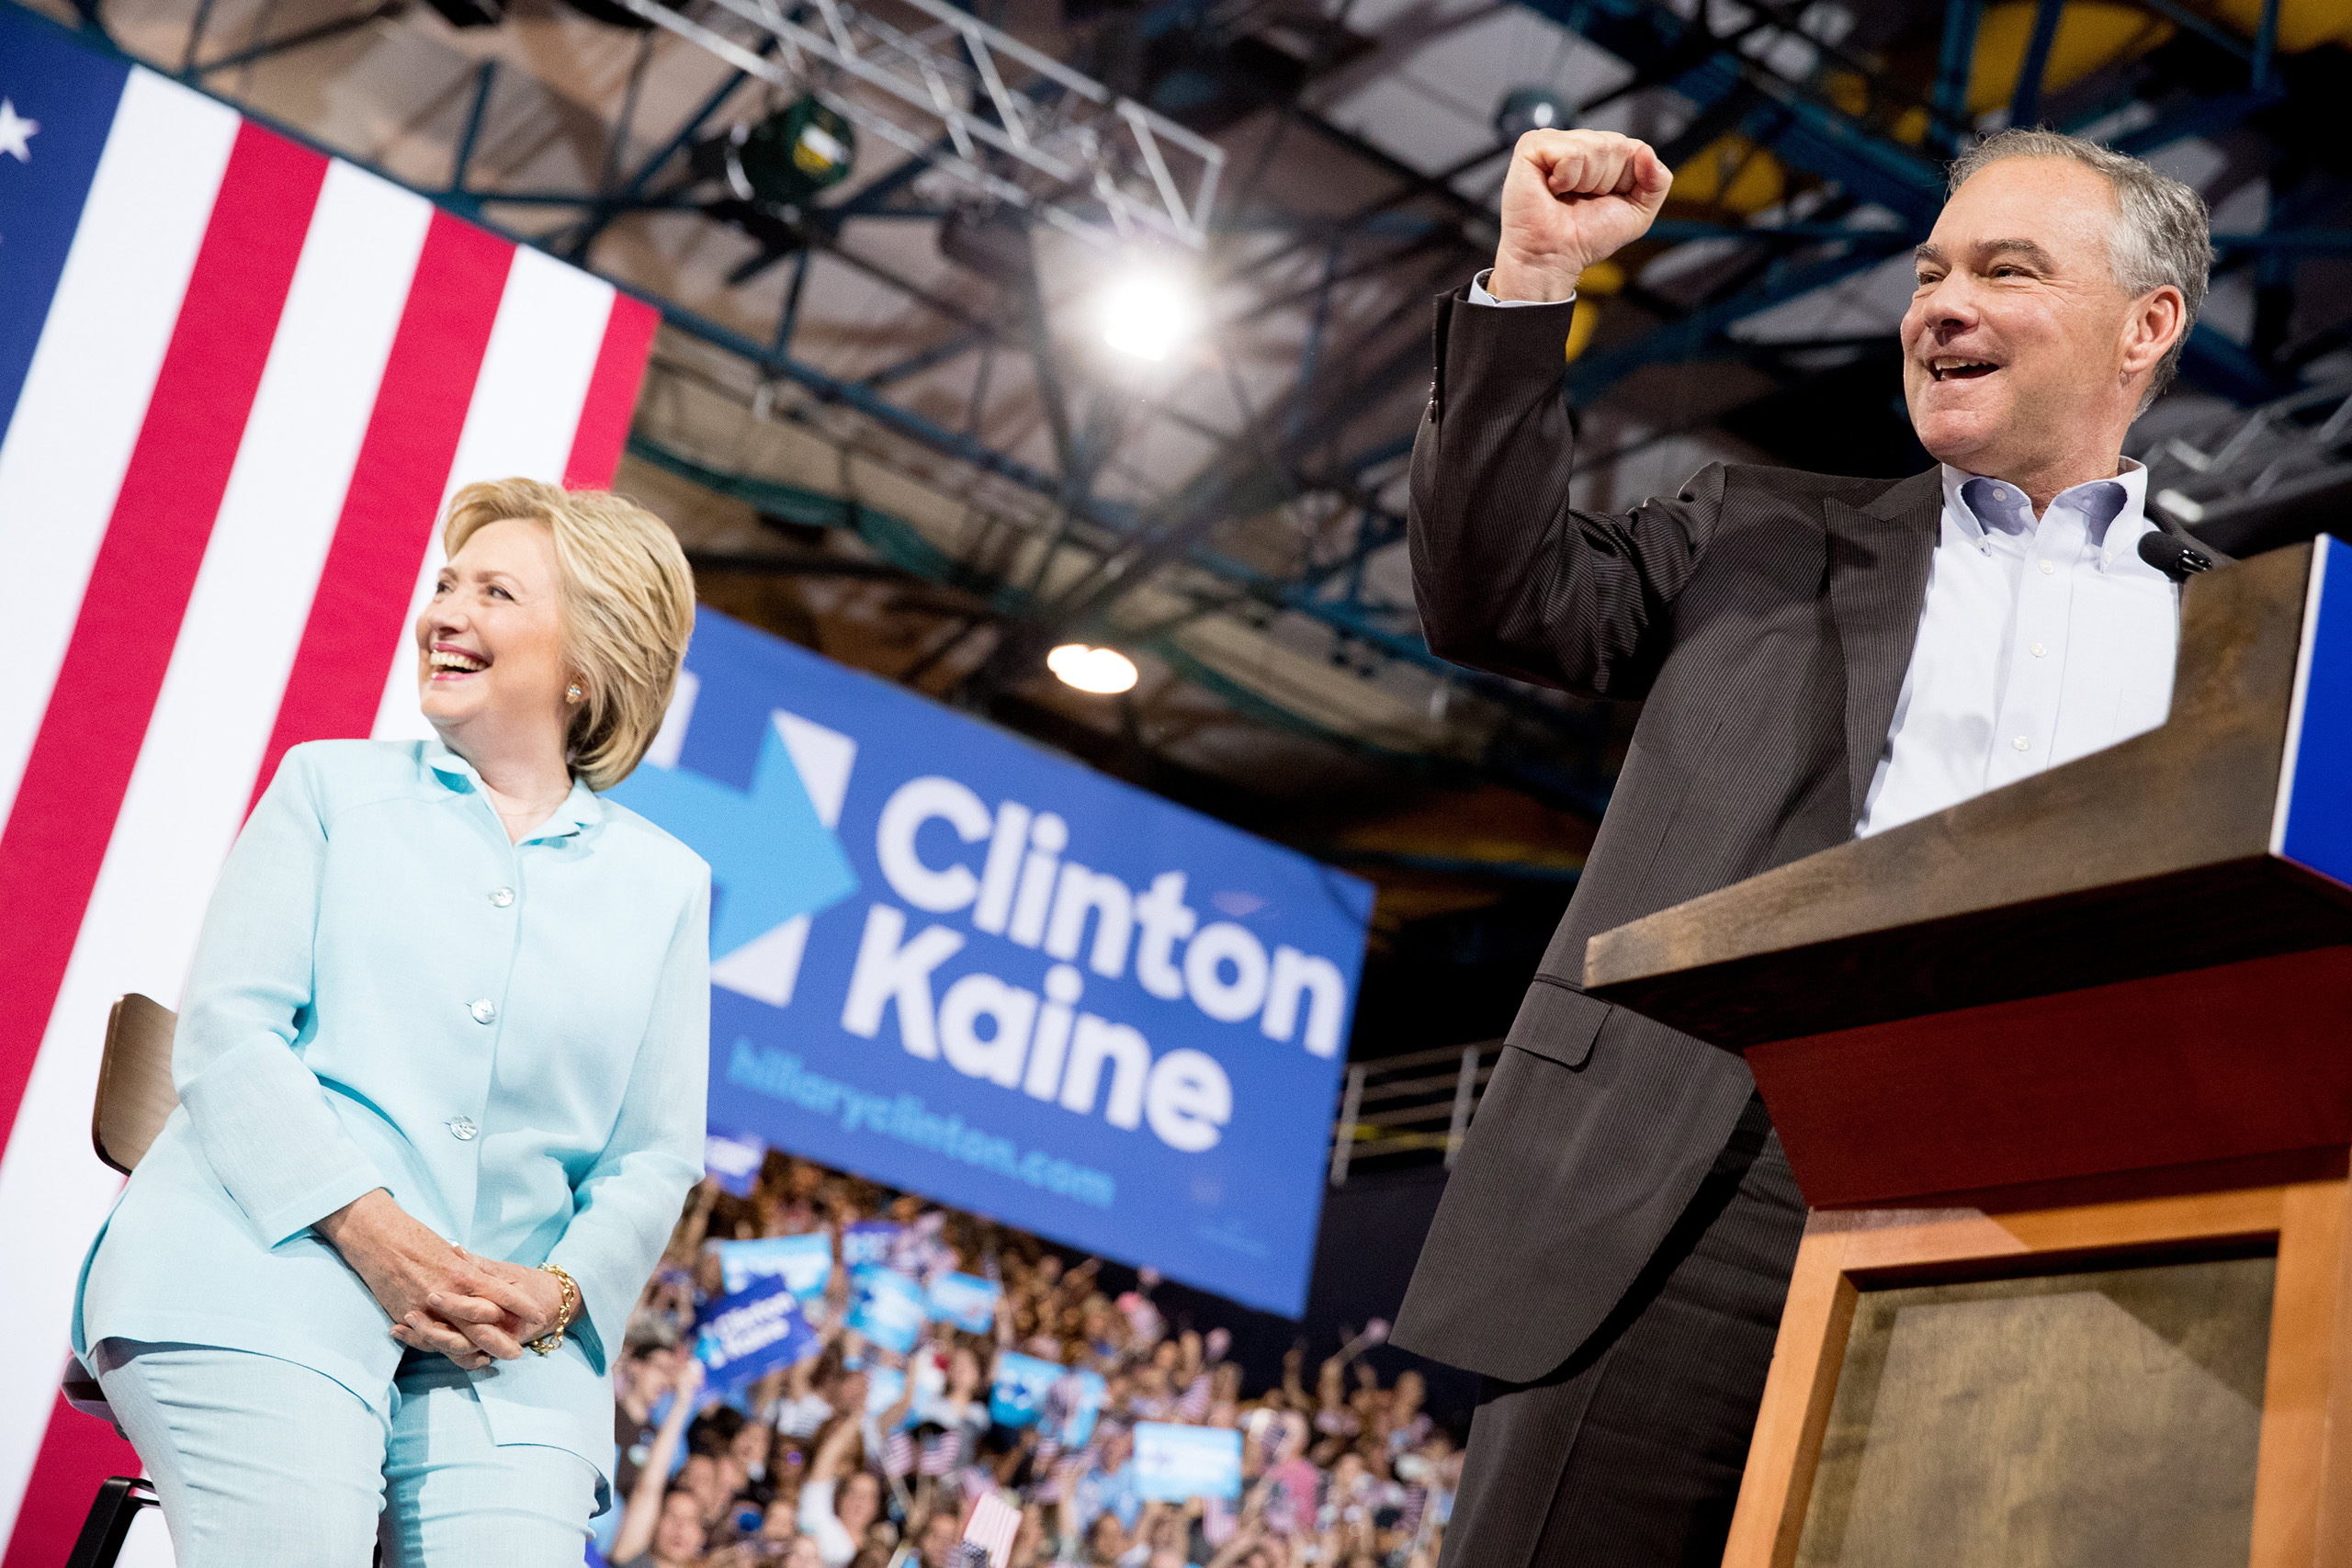 Sen. Tim Kaine, D-Va., right, accompanied by Democratic presidential candidate Hillary Clinton, left, speaks at a rally at Florida International University Panther Arena in Miami, Saturday, July 23, 2016. Clinton has chosen Kaine to be her running mate. (AP Photo/Andrew Harnik) (Andrew Harnik—AP)